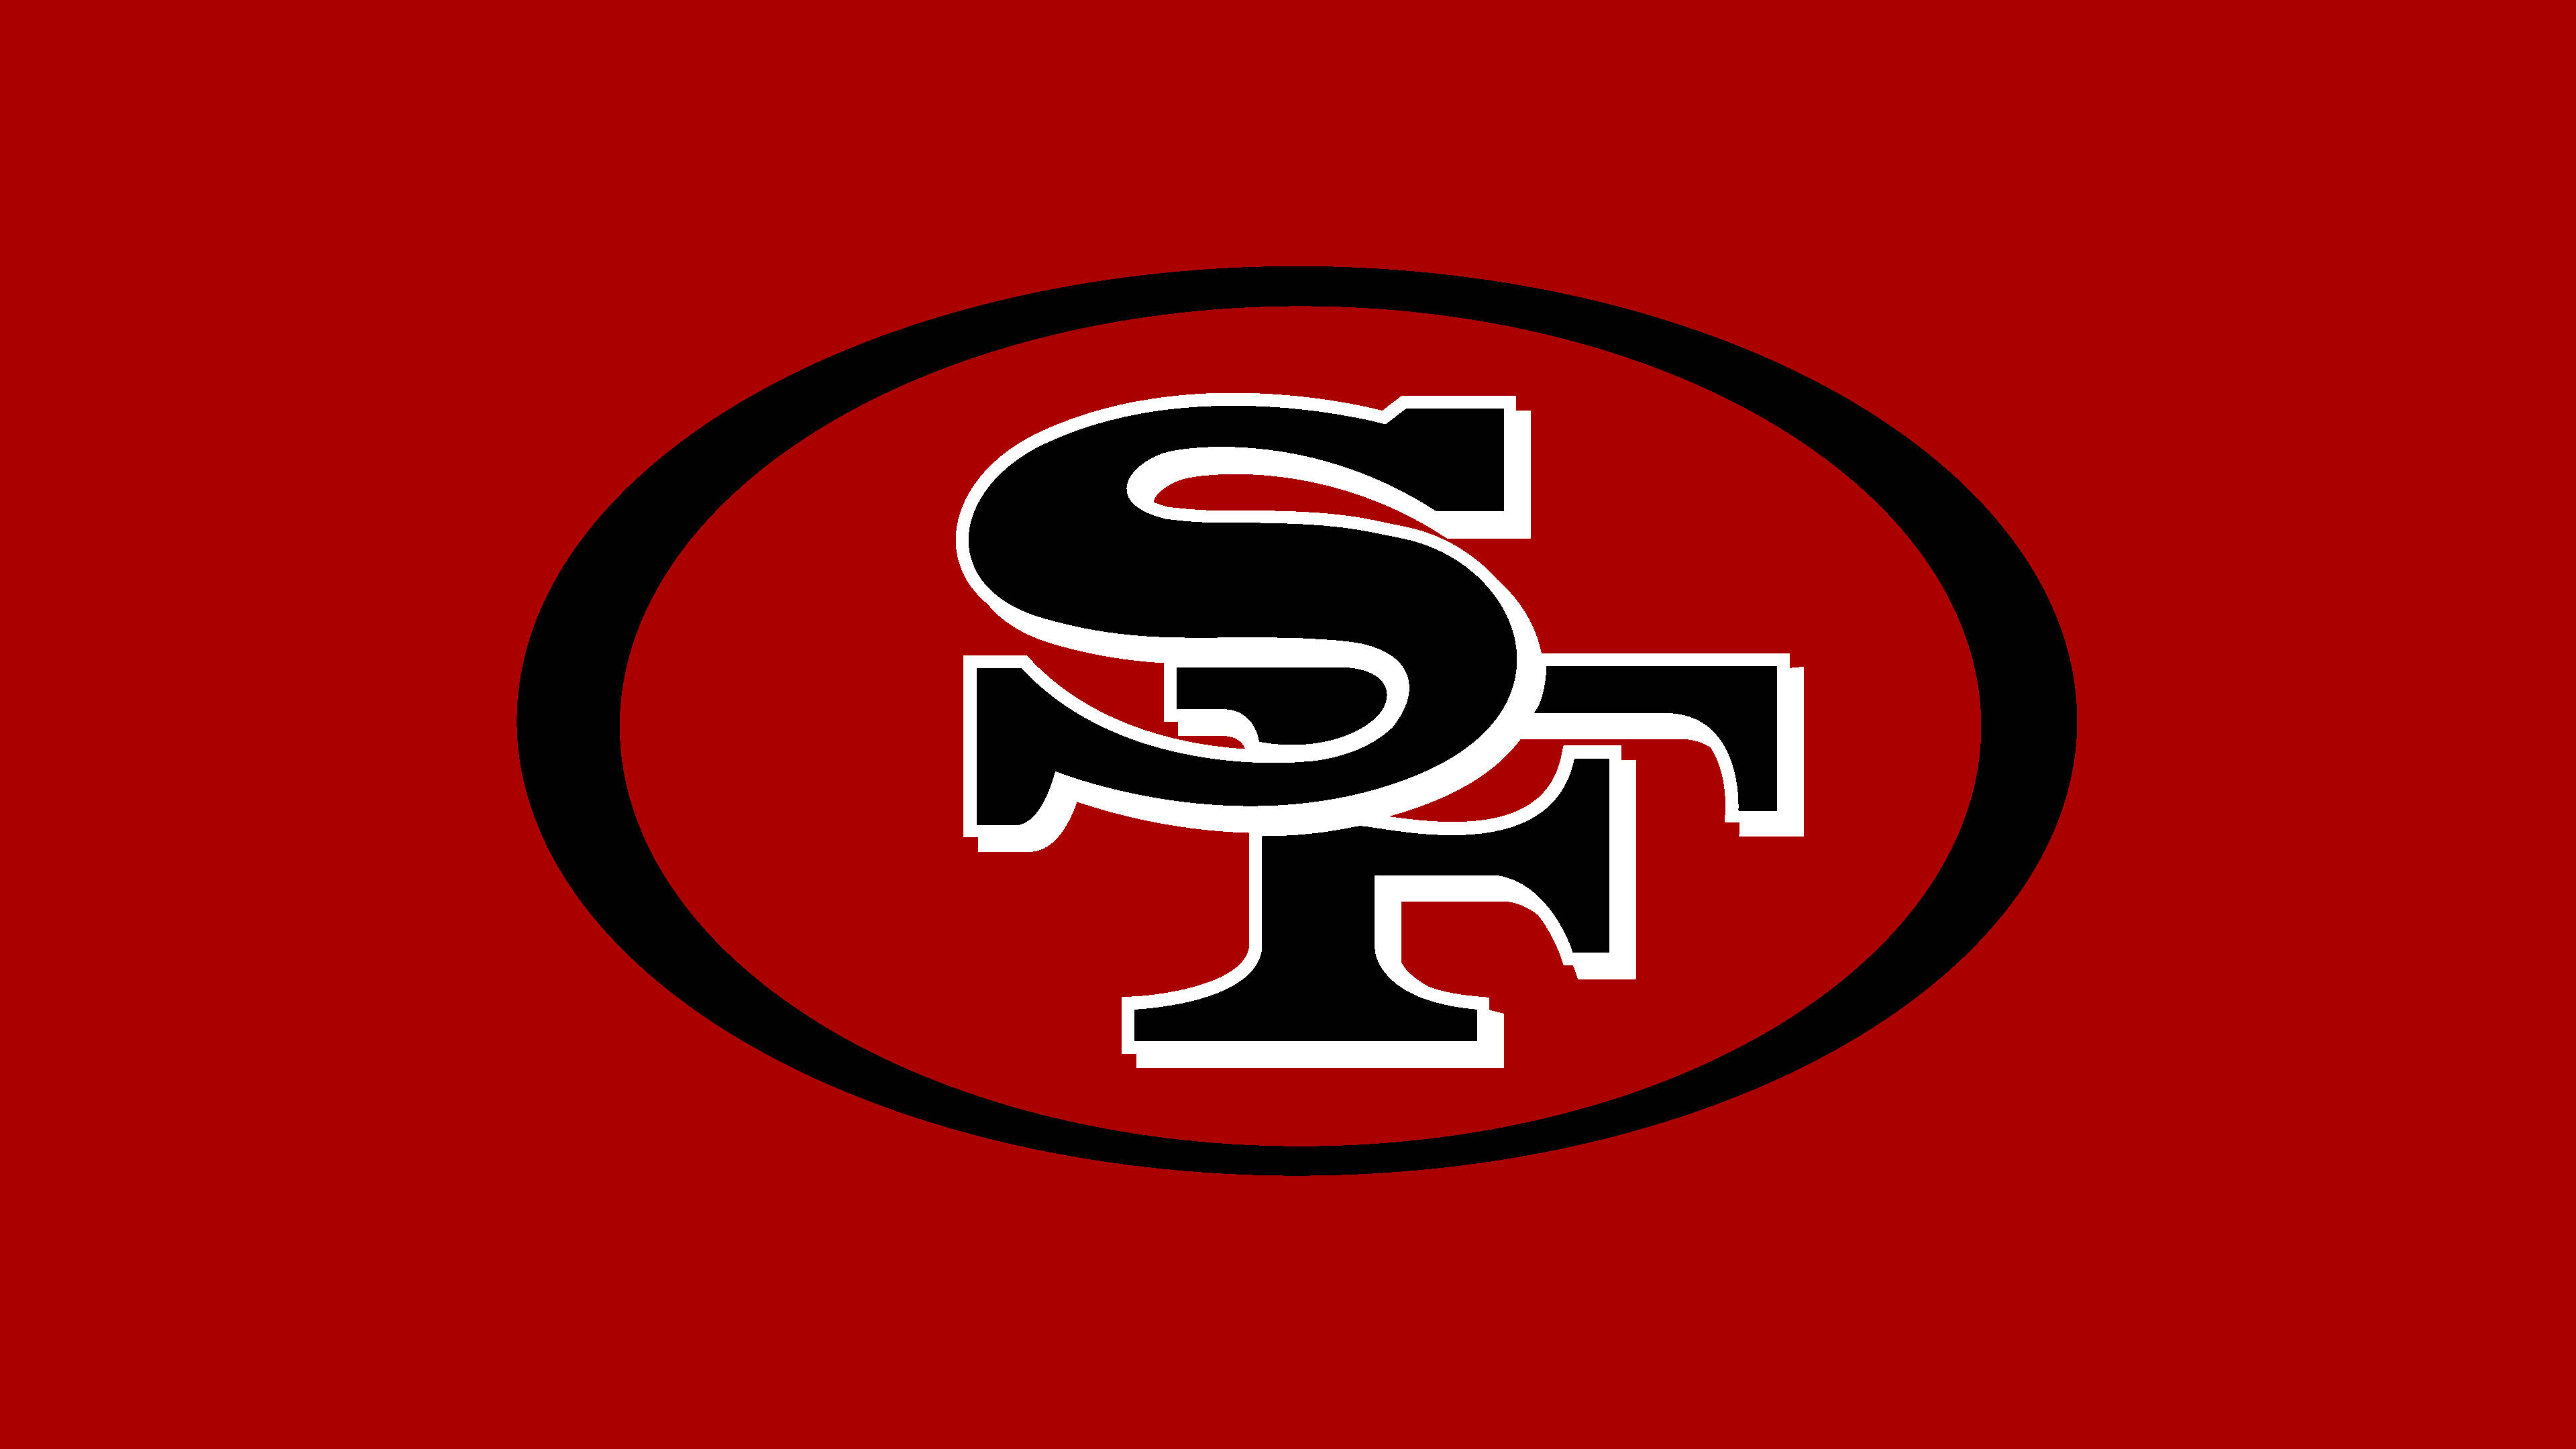 Download The Official Logo of the San Francisco 49ers Wallpaper | Wallpapers .com